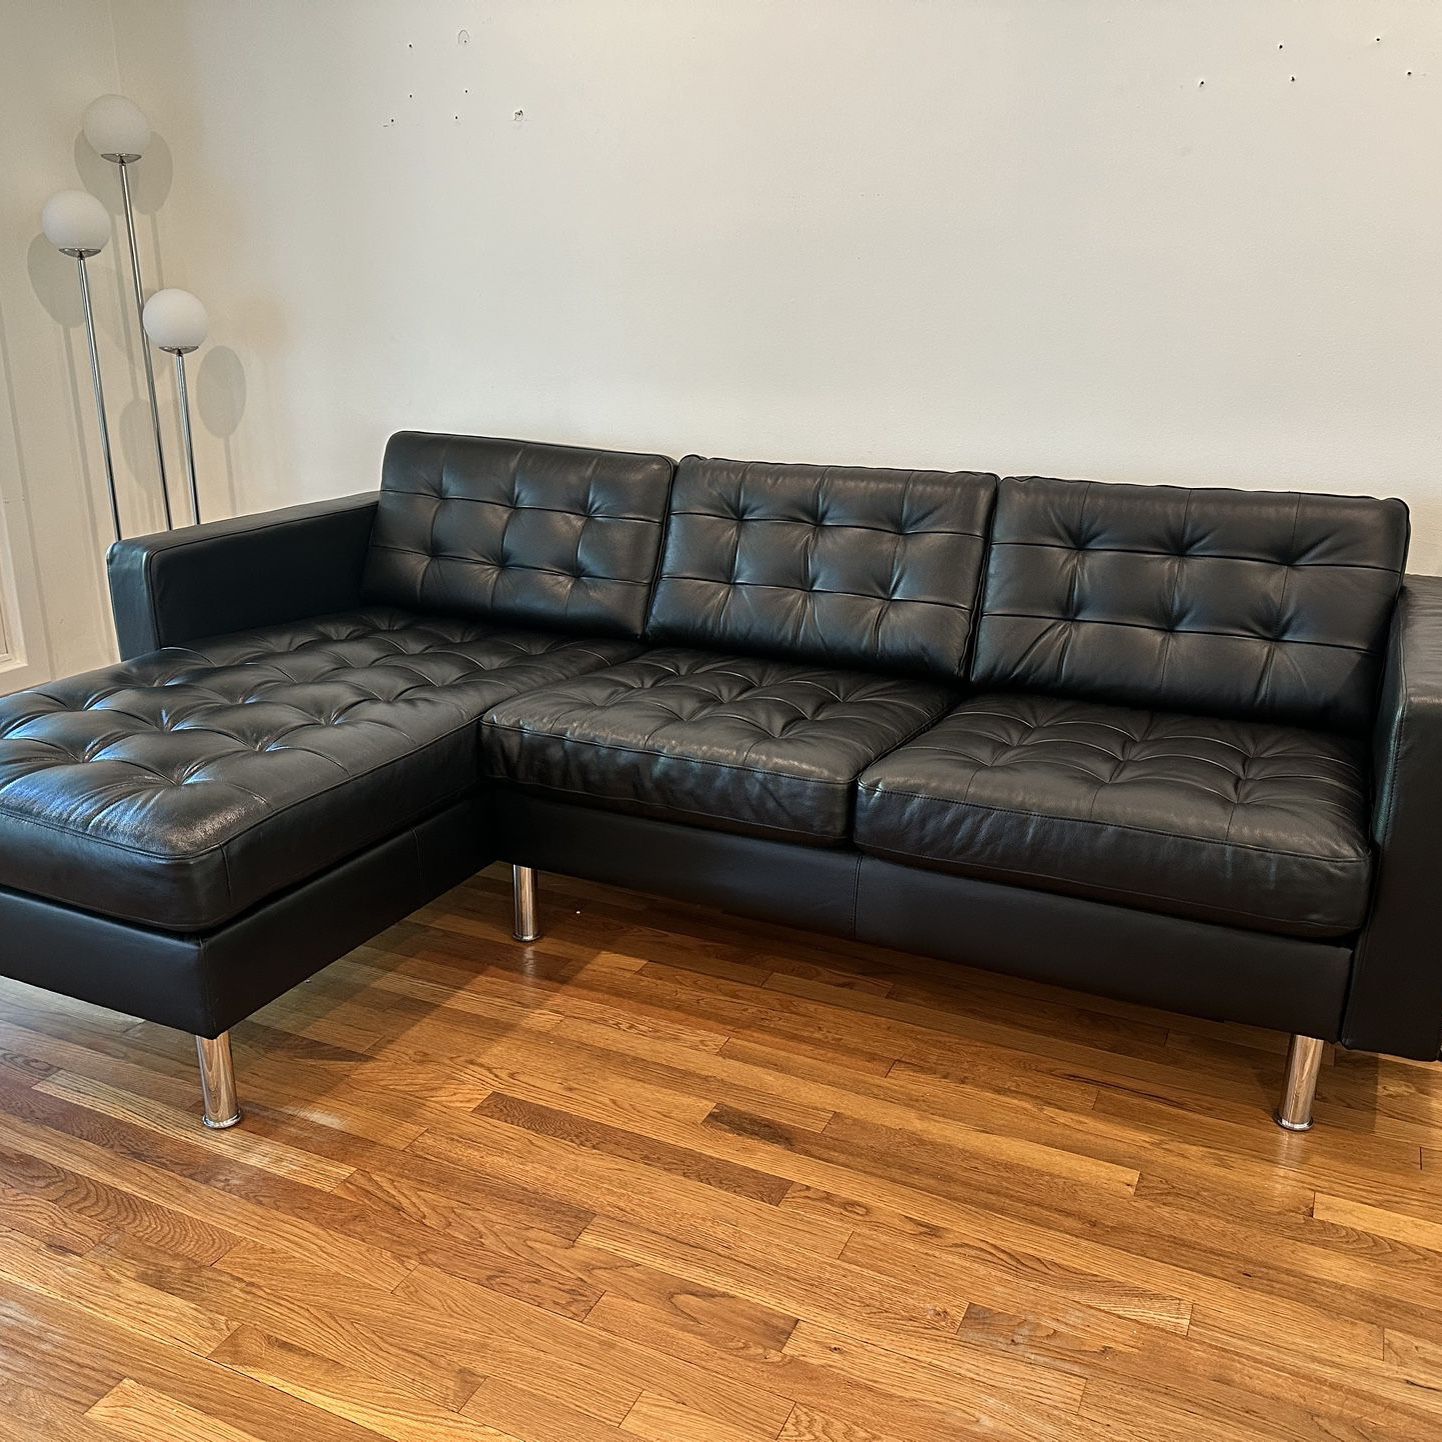  IKEA Black Leather Sofa With Chaise